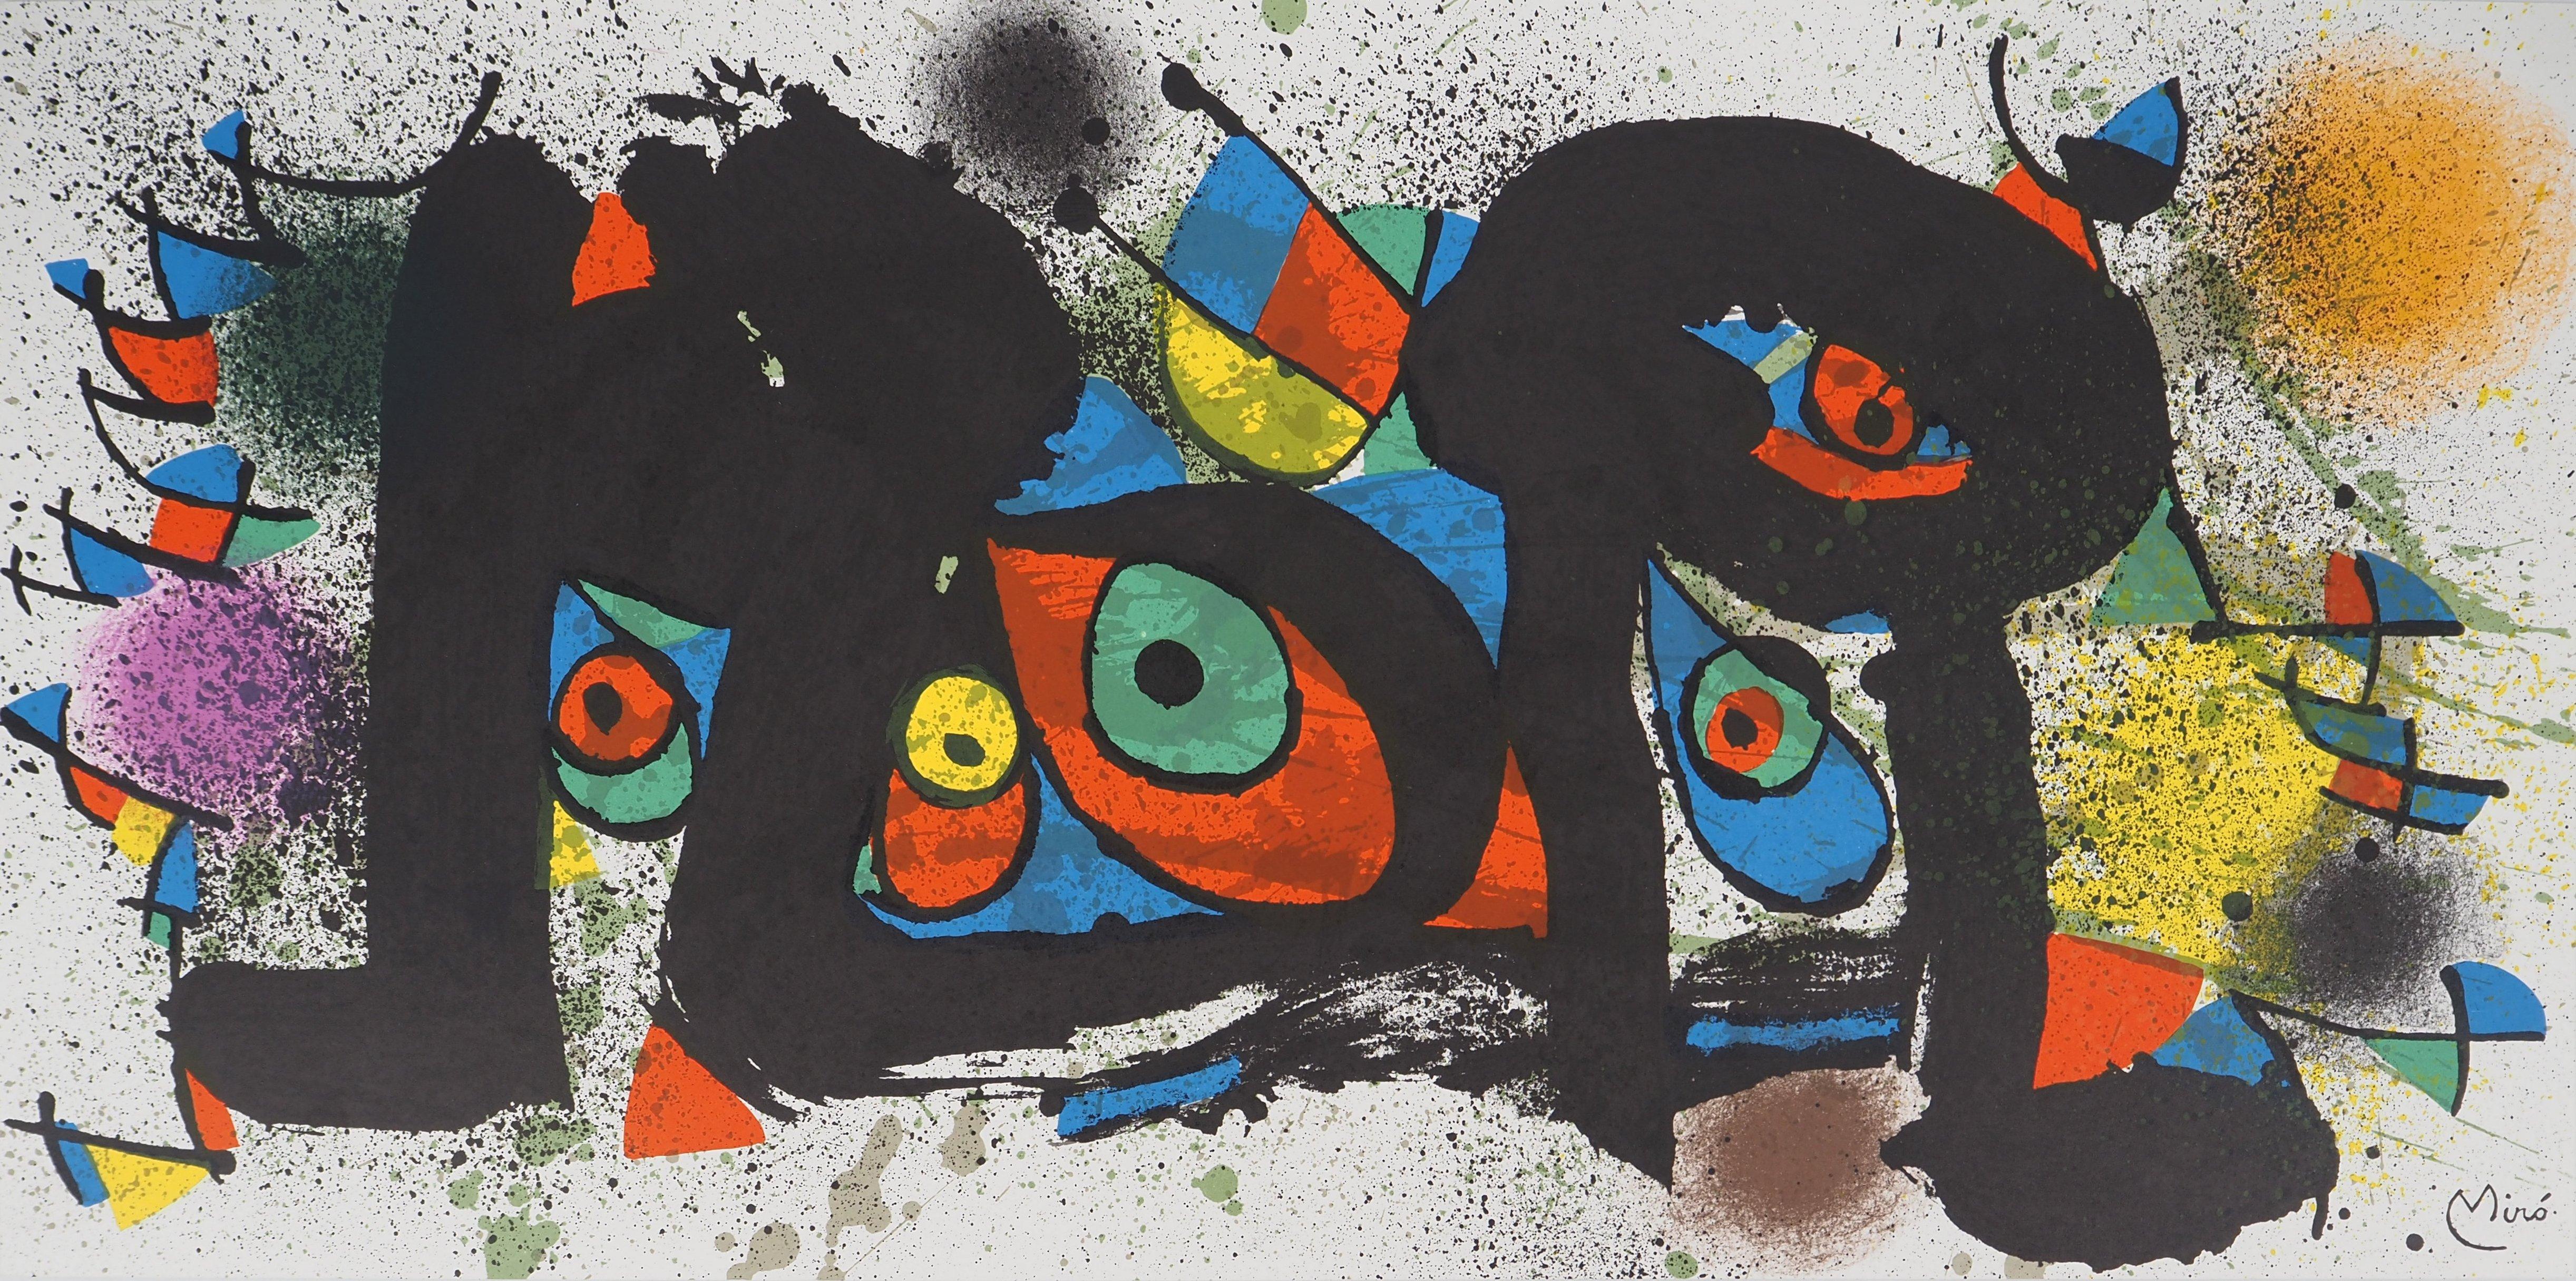 Joan Miró Abstract Print - Surrealist Birds - Original Lithograph Signed in the Plate - Mourlot #948